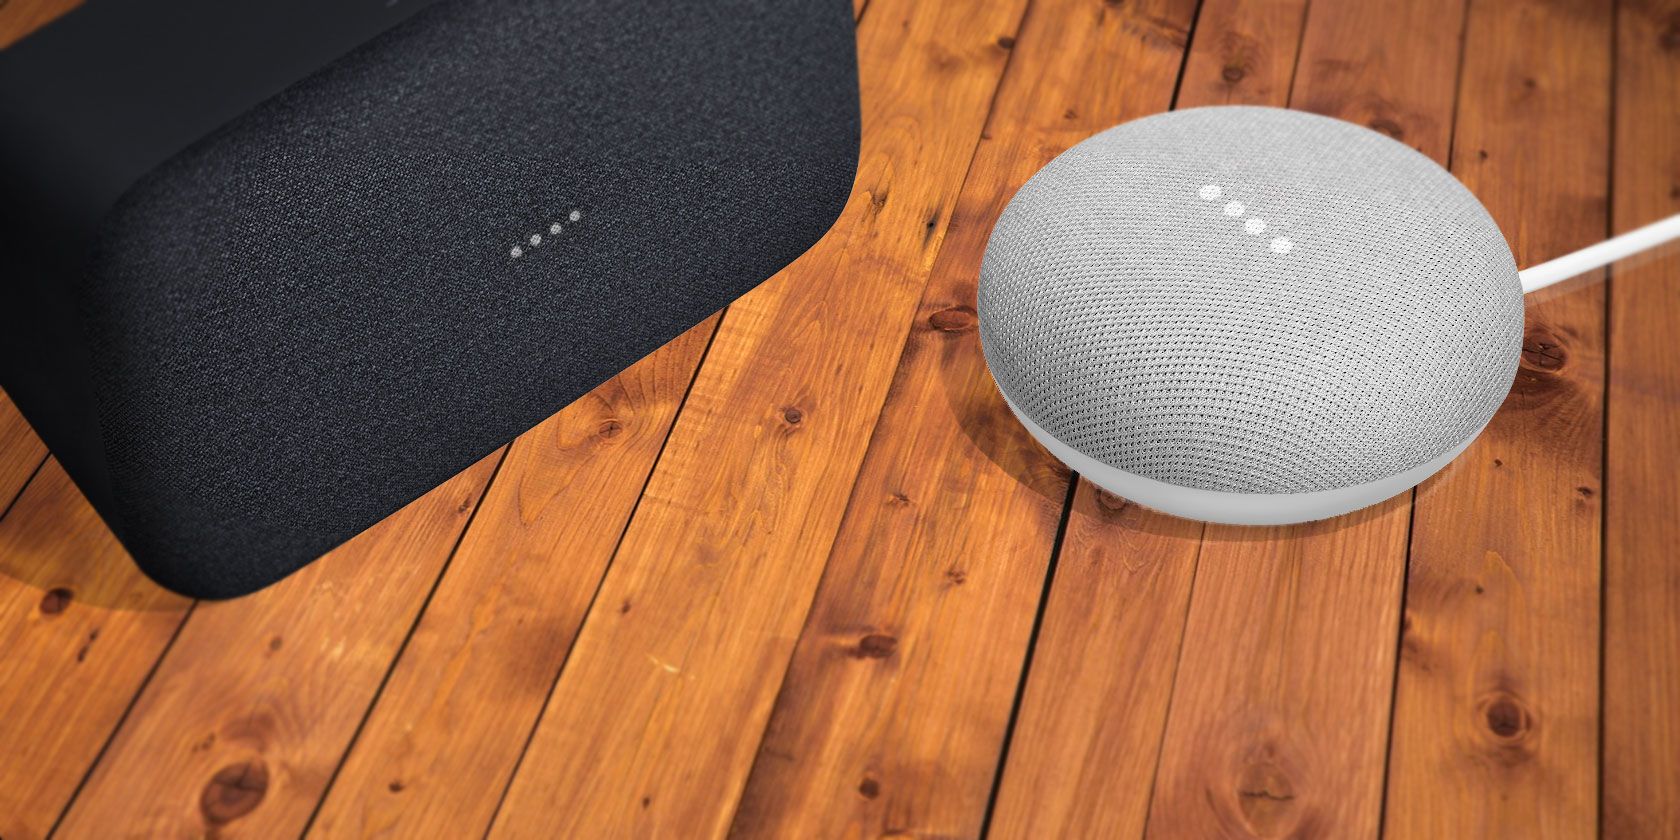 16 Useful Google Home Commands for Mini Games and More